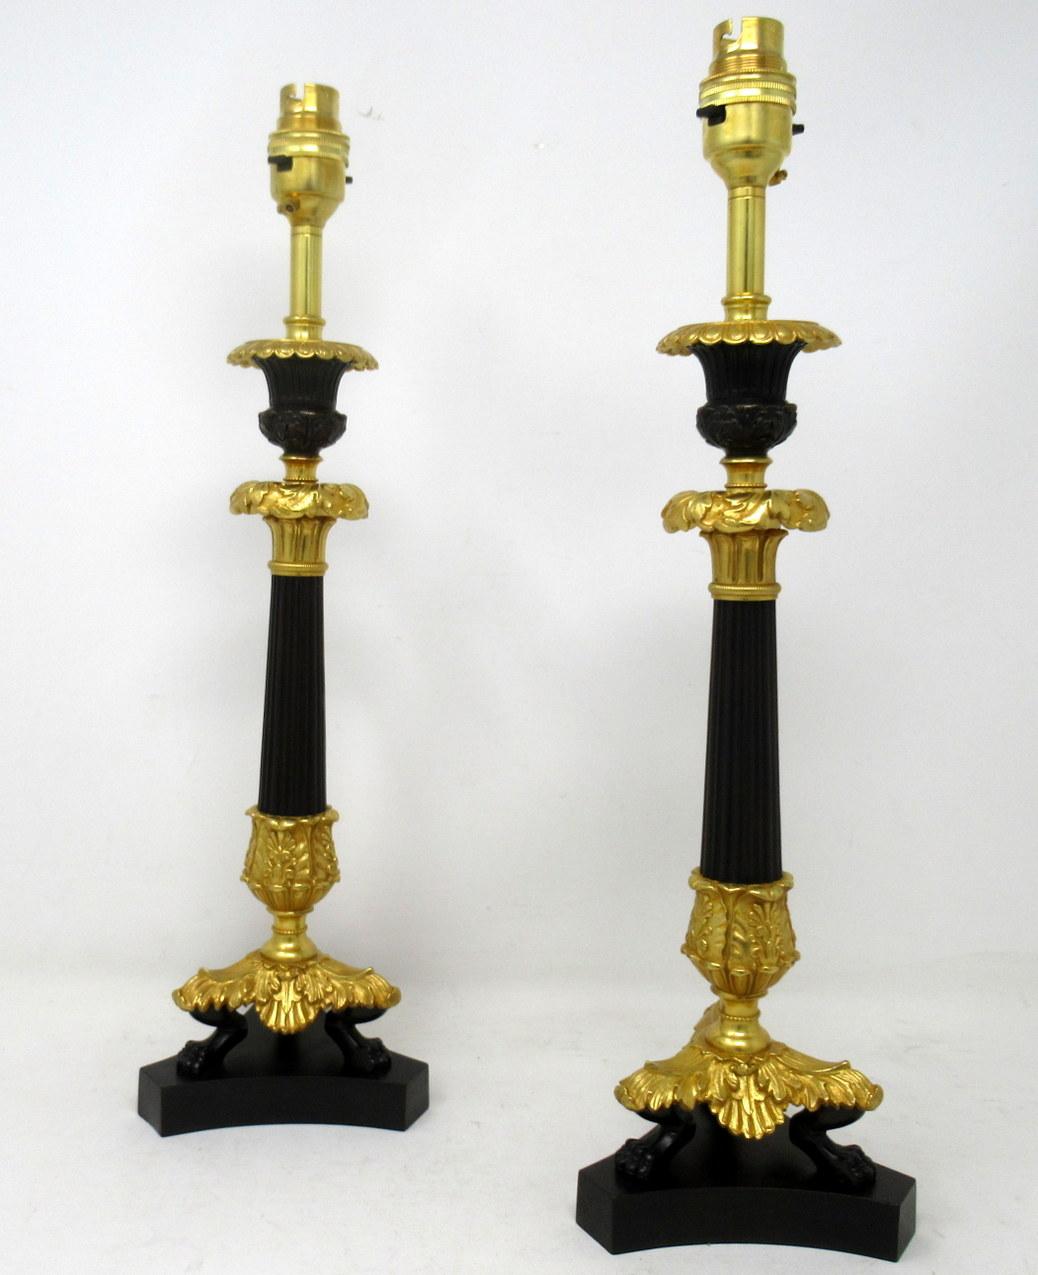 Stunning identical pair French heavy gauge ormolu and bronzed single light candlesticks of average size proportions, now converted to a pair of electric table lamps, with tapering reeded central bronzed column, each ending with three very ornate